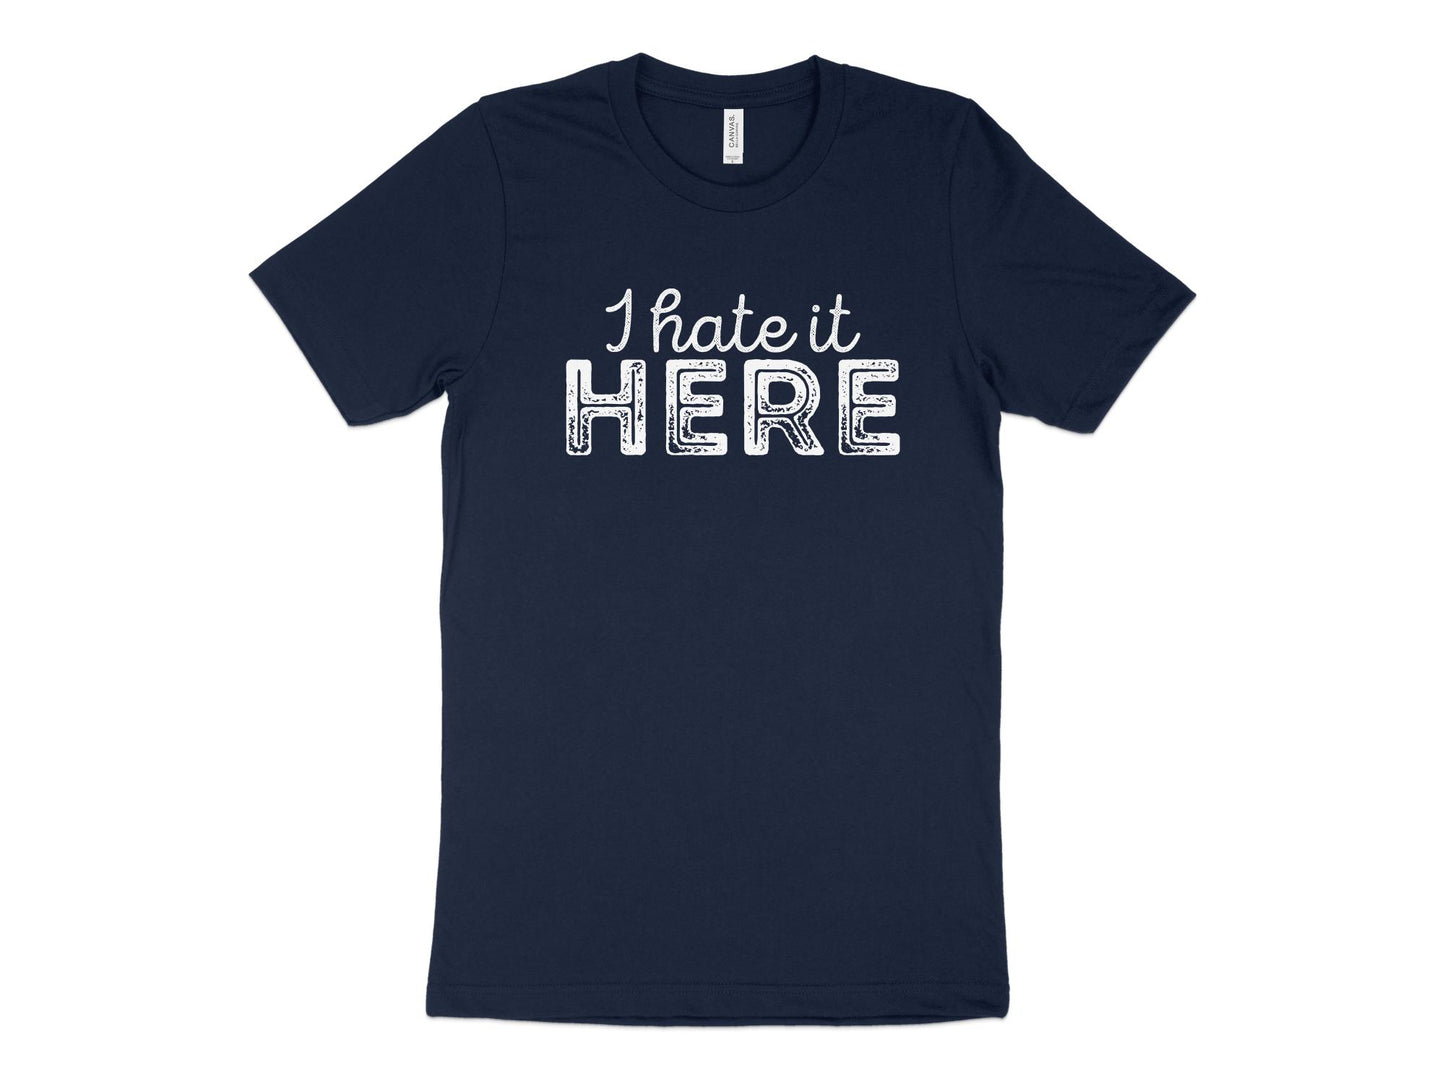 I Hate it Here Shirt, navy blue